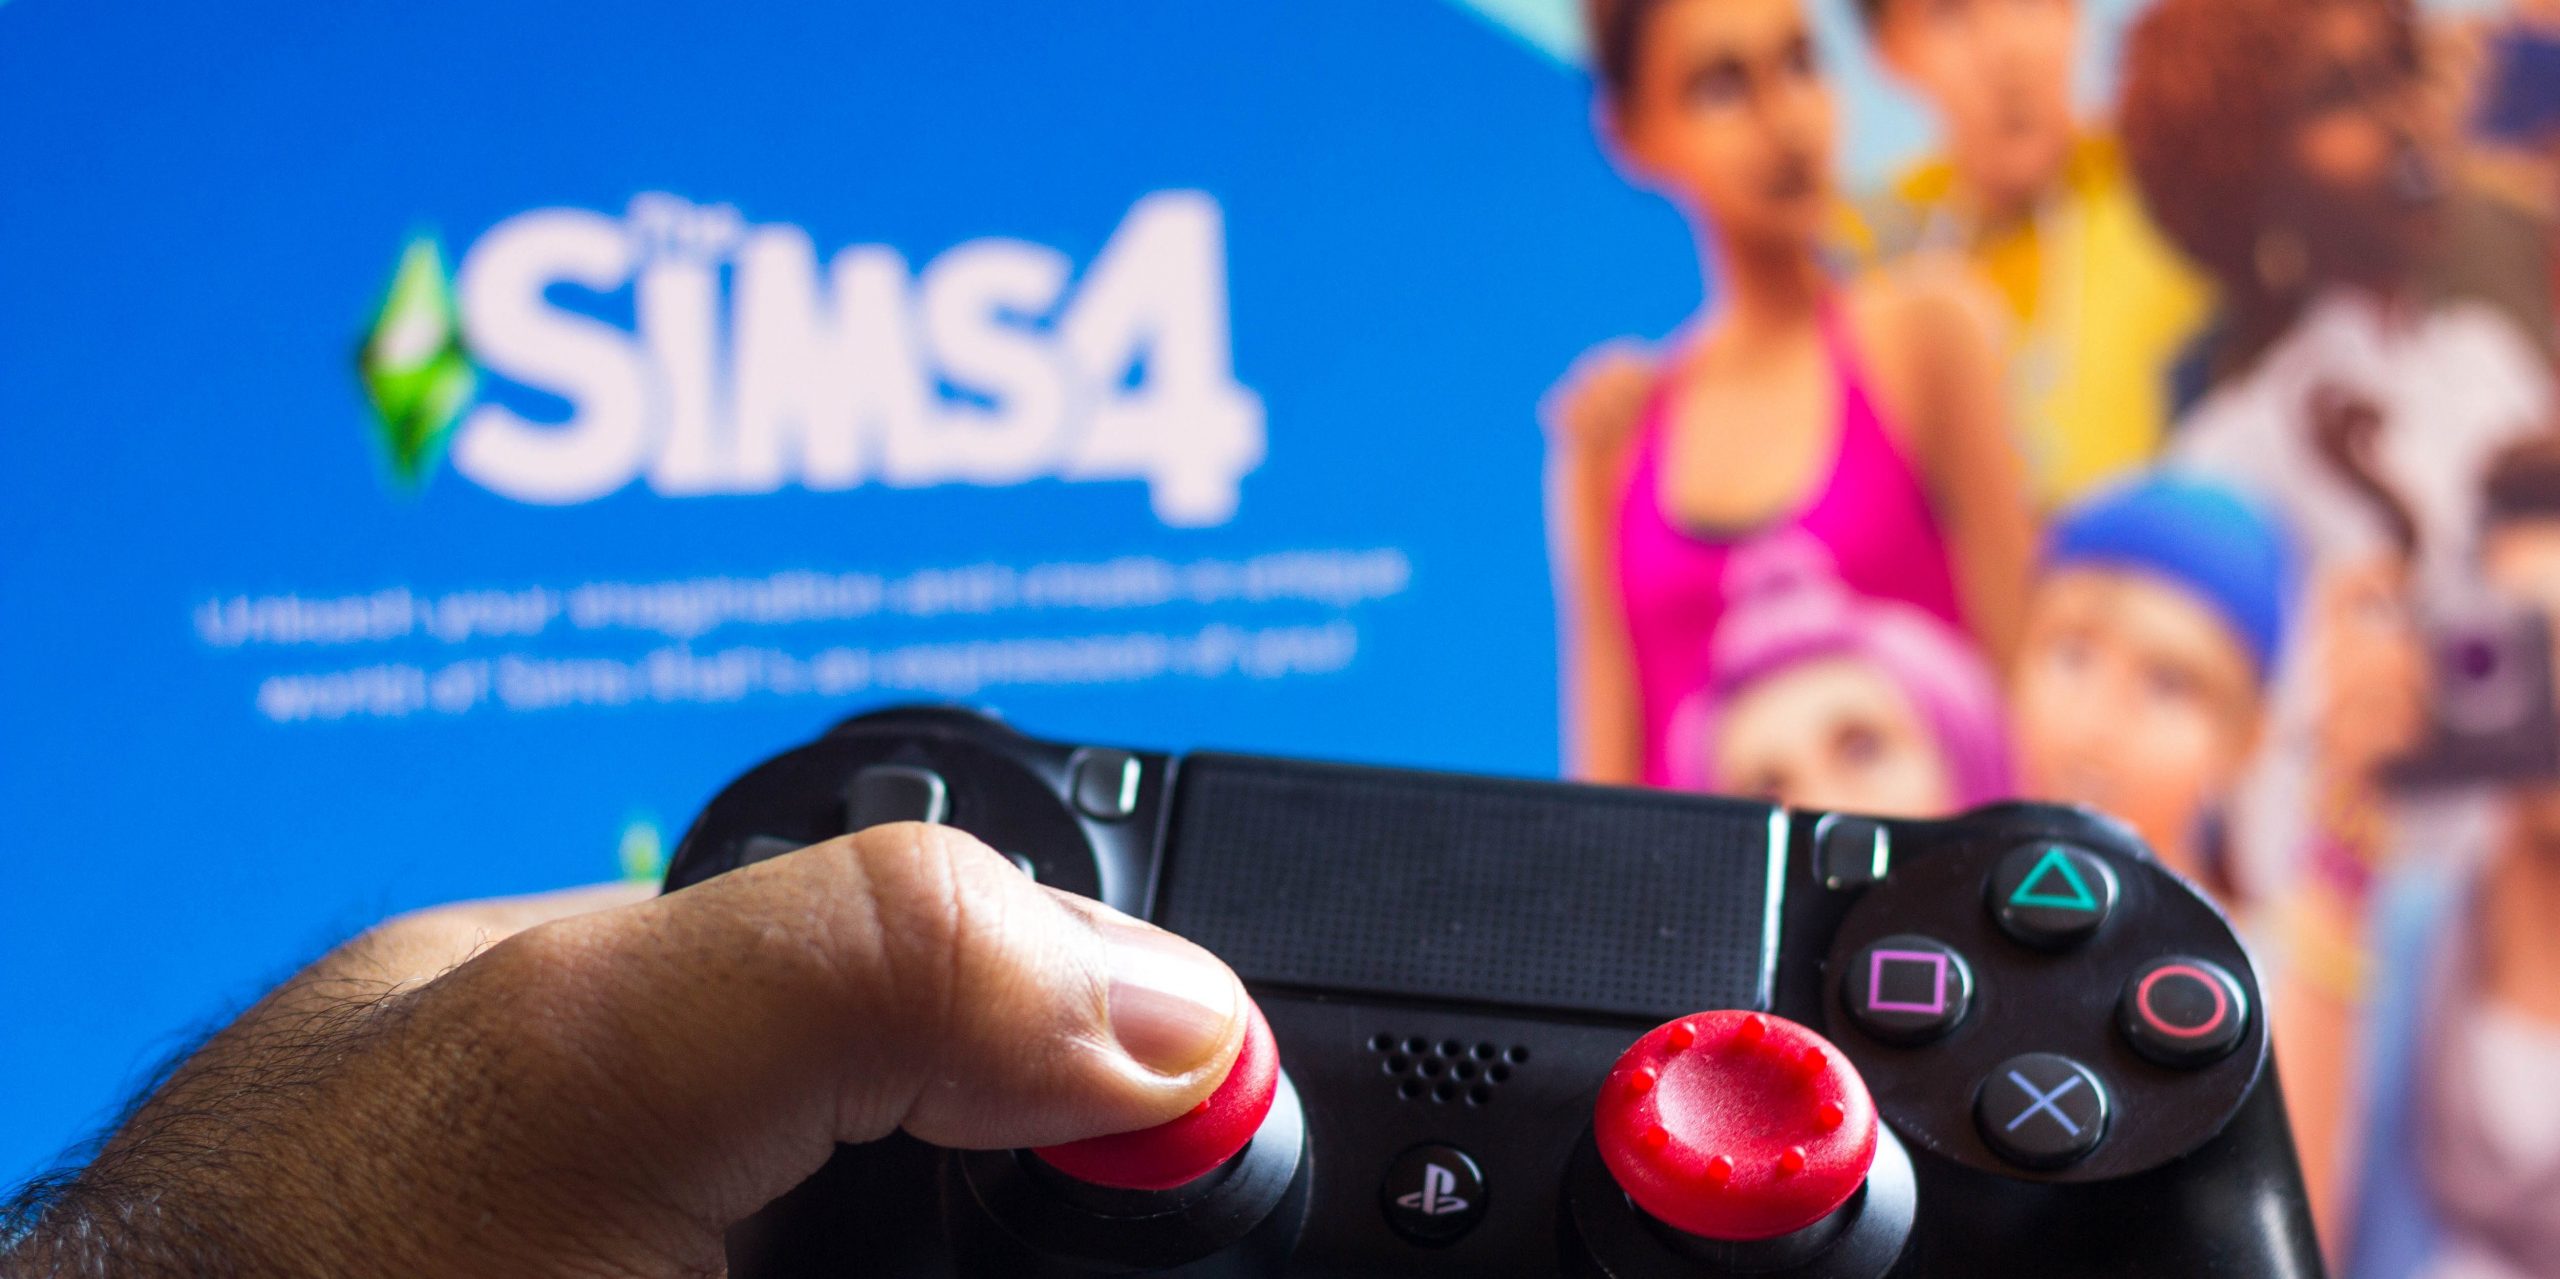 A person's hand holding a video game controller in front of a screen showing The Sims 4.